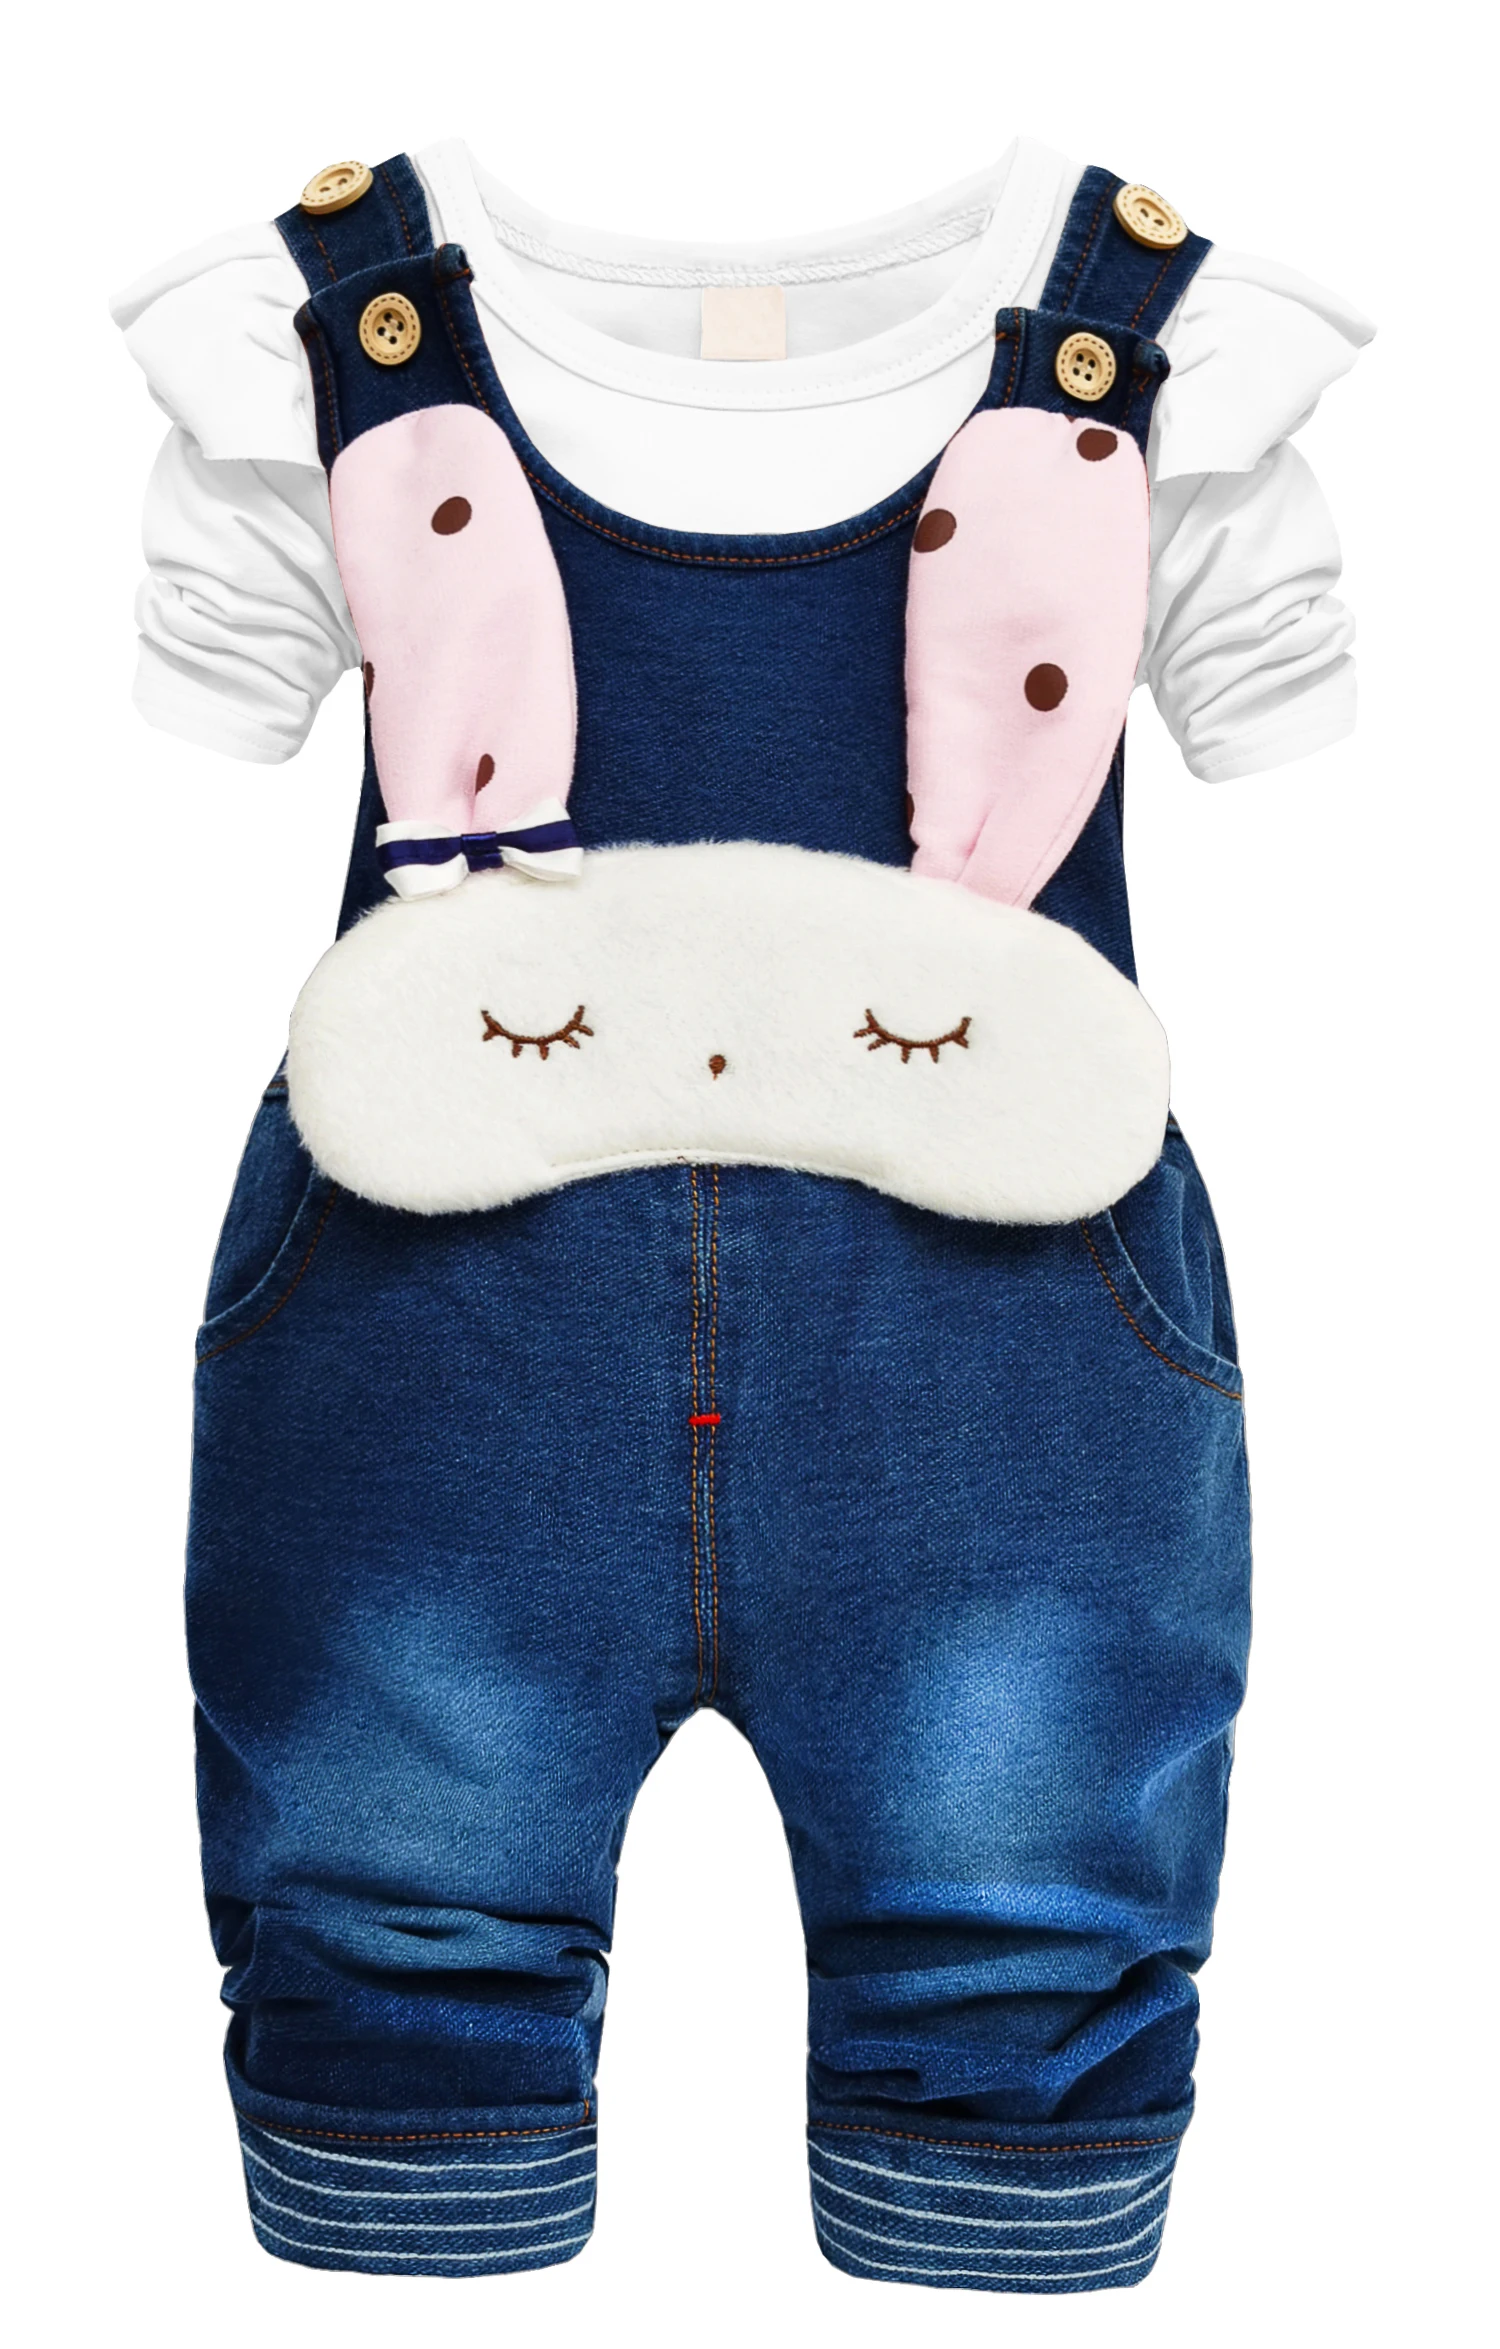 Chumhey Baby & Toddler Boys Jean Overalls Pants Set 